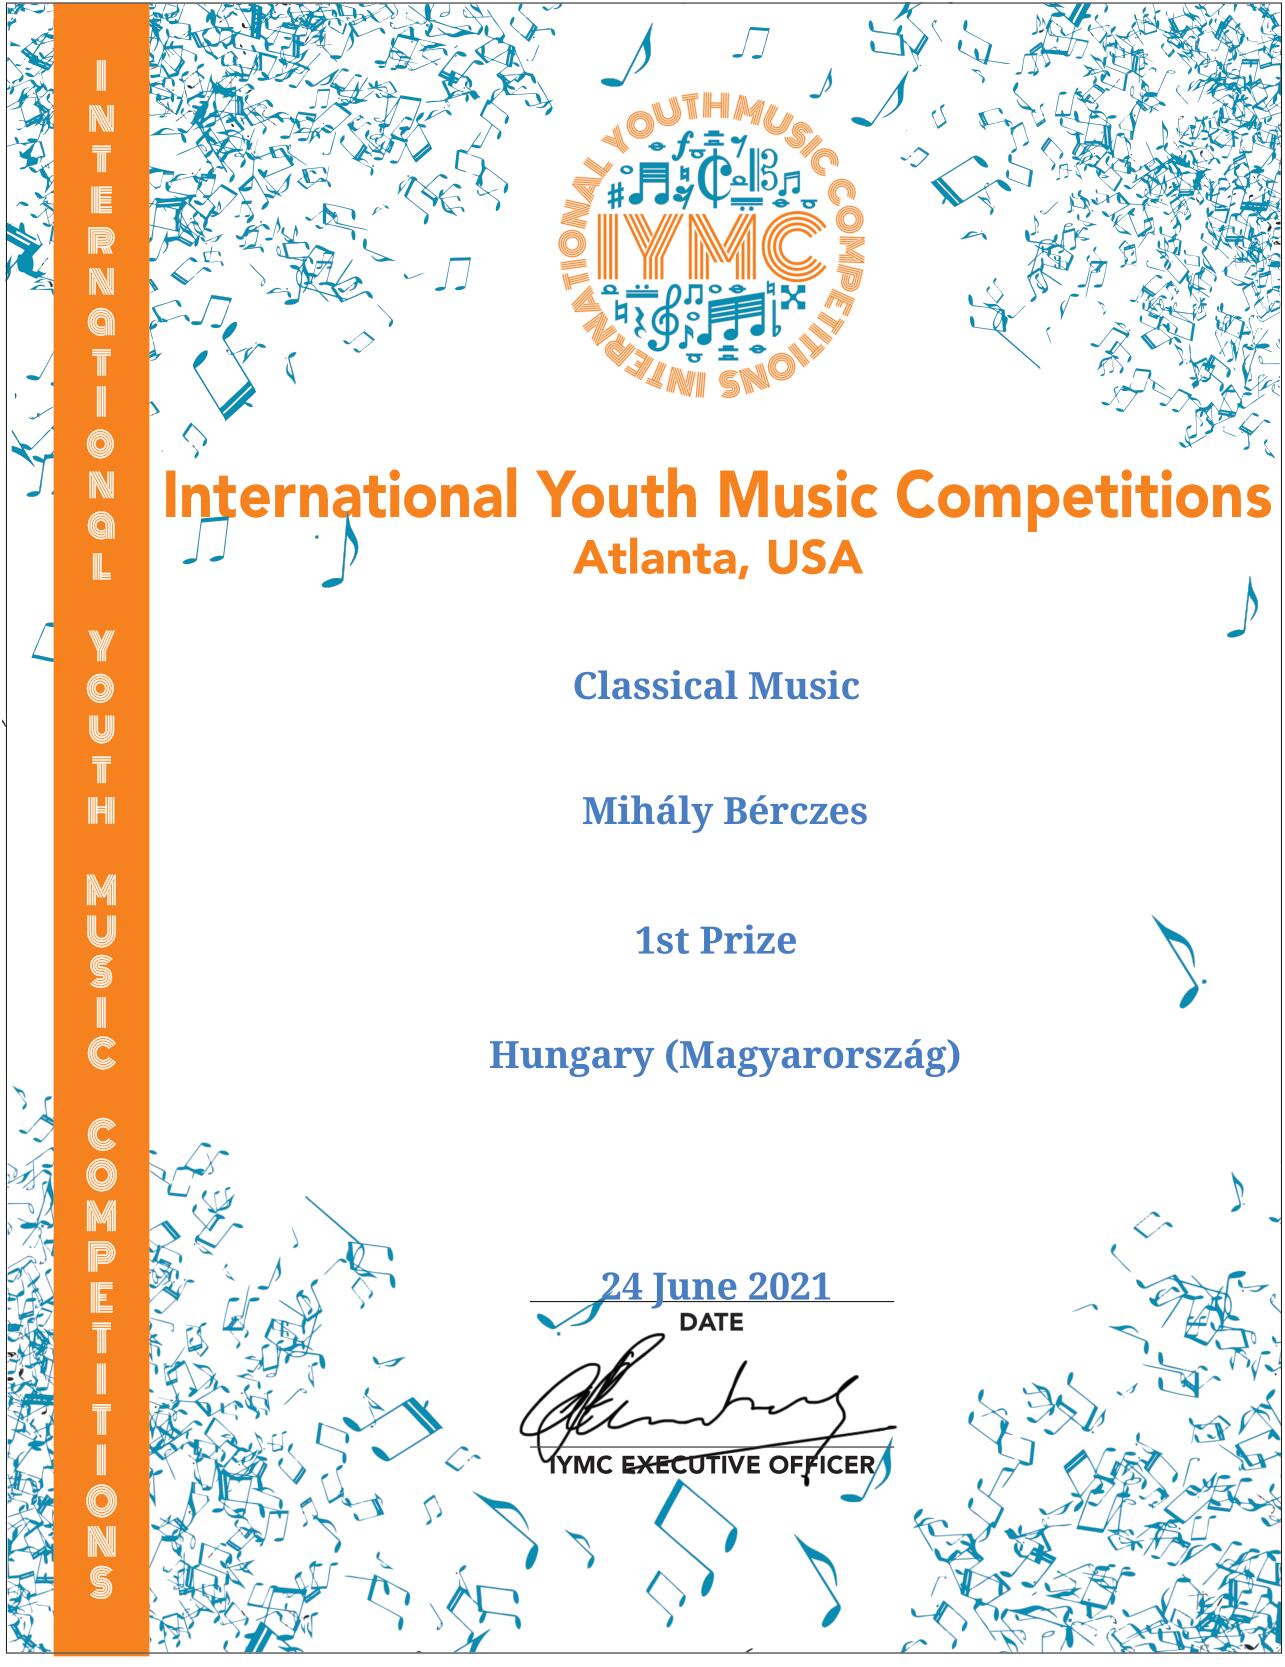 mihaly-berczes-1-may-2021-certificate